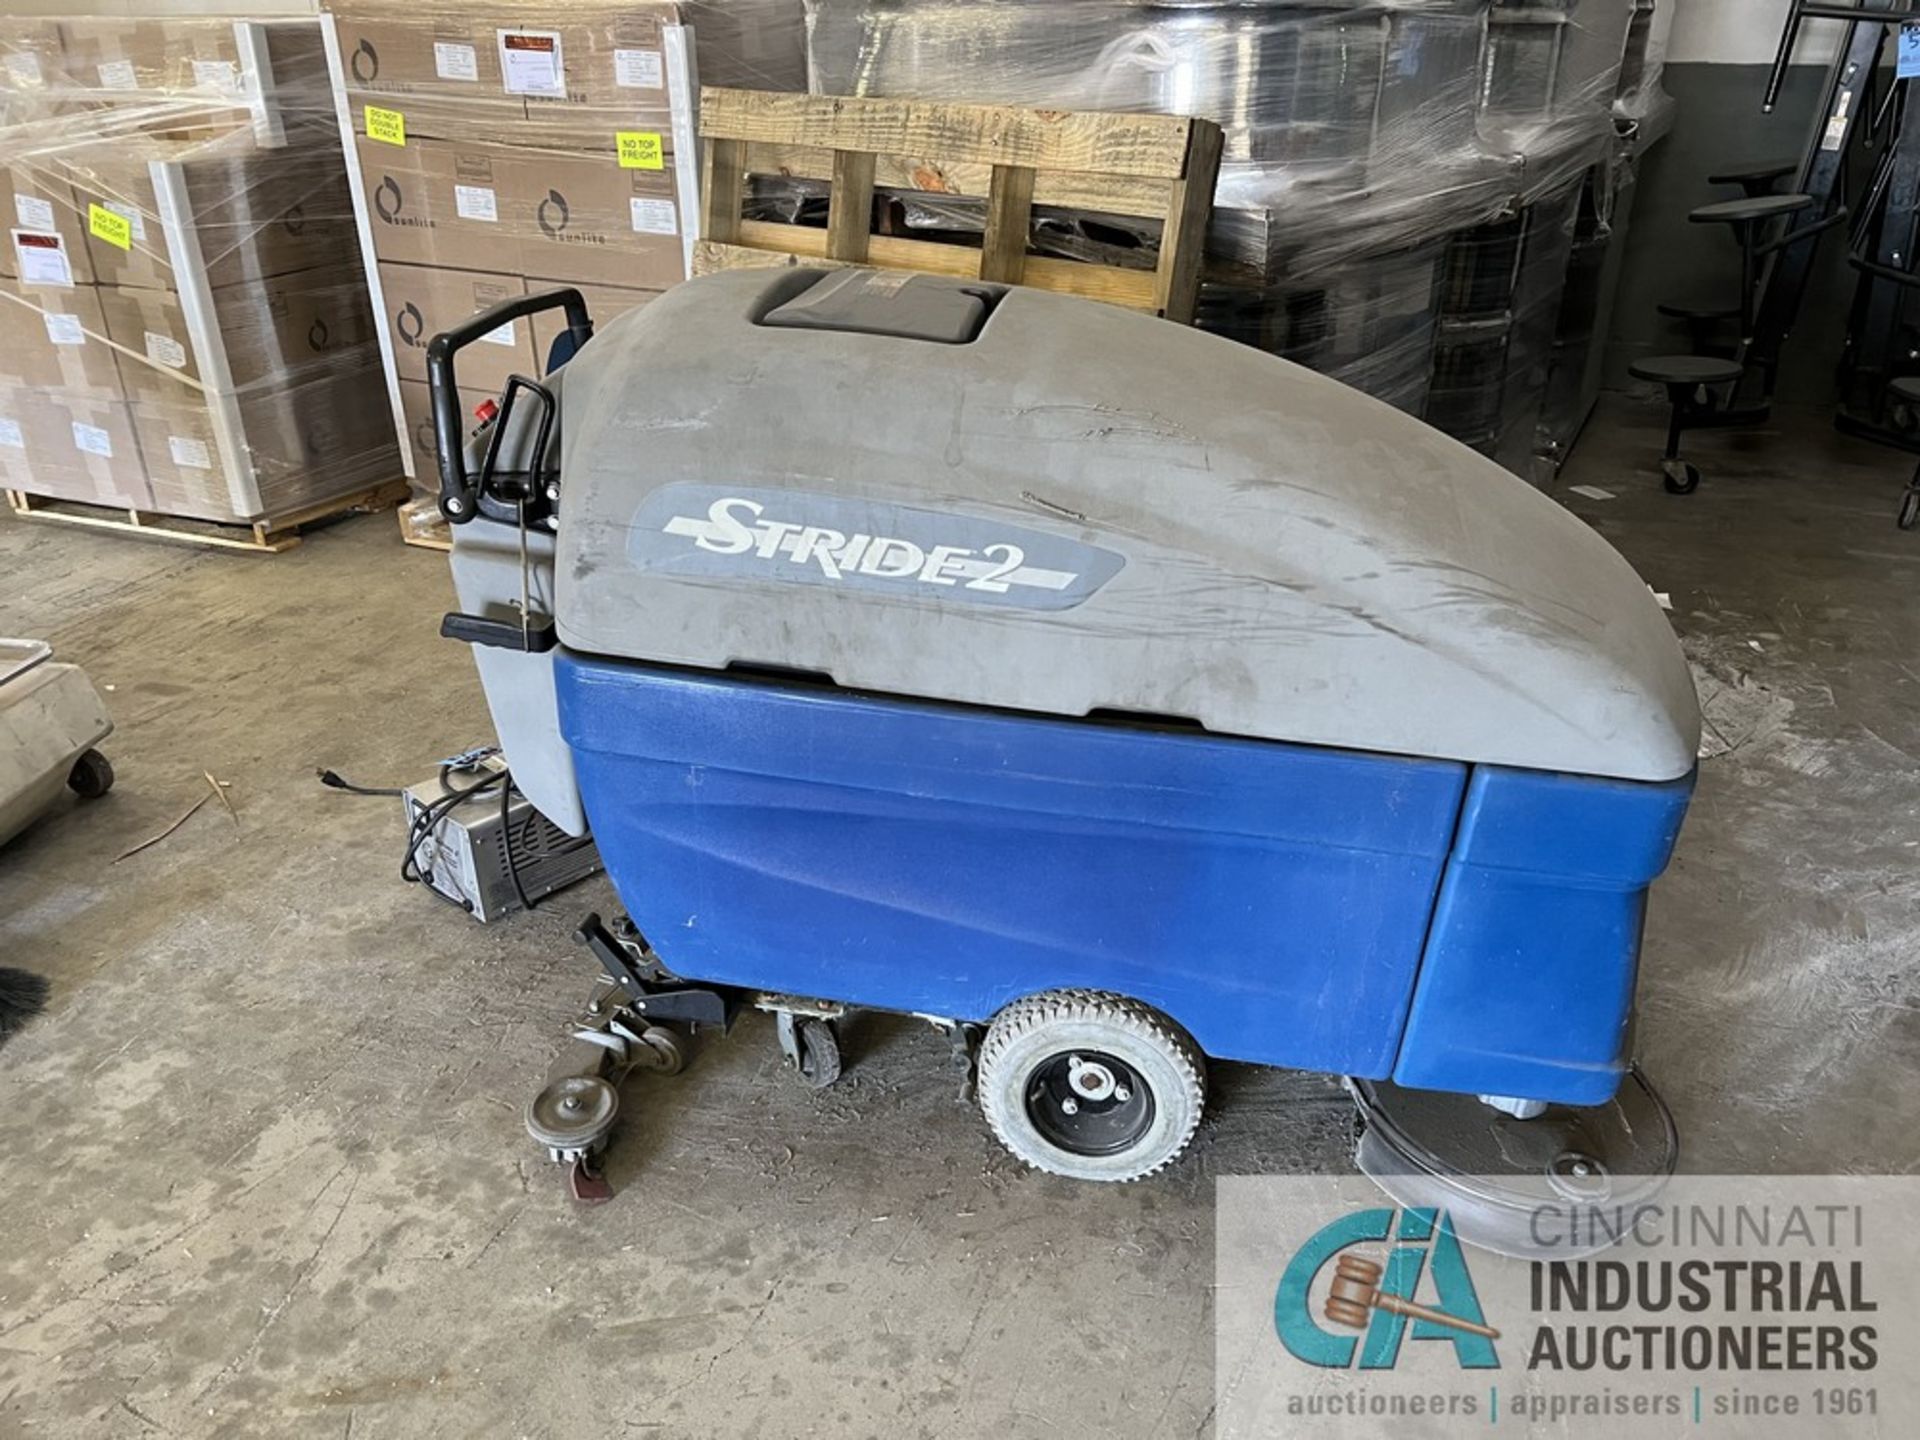 WINDSOR STRIDE 2 WALK BEHIND ELECTRIC FLOOR SCRUBBER - Located in shipping area